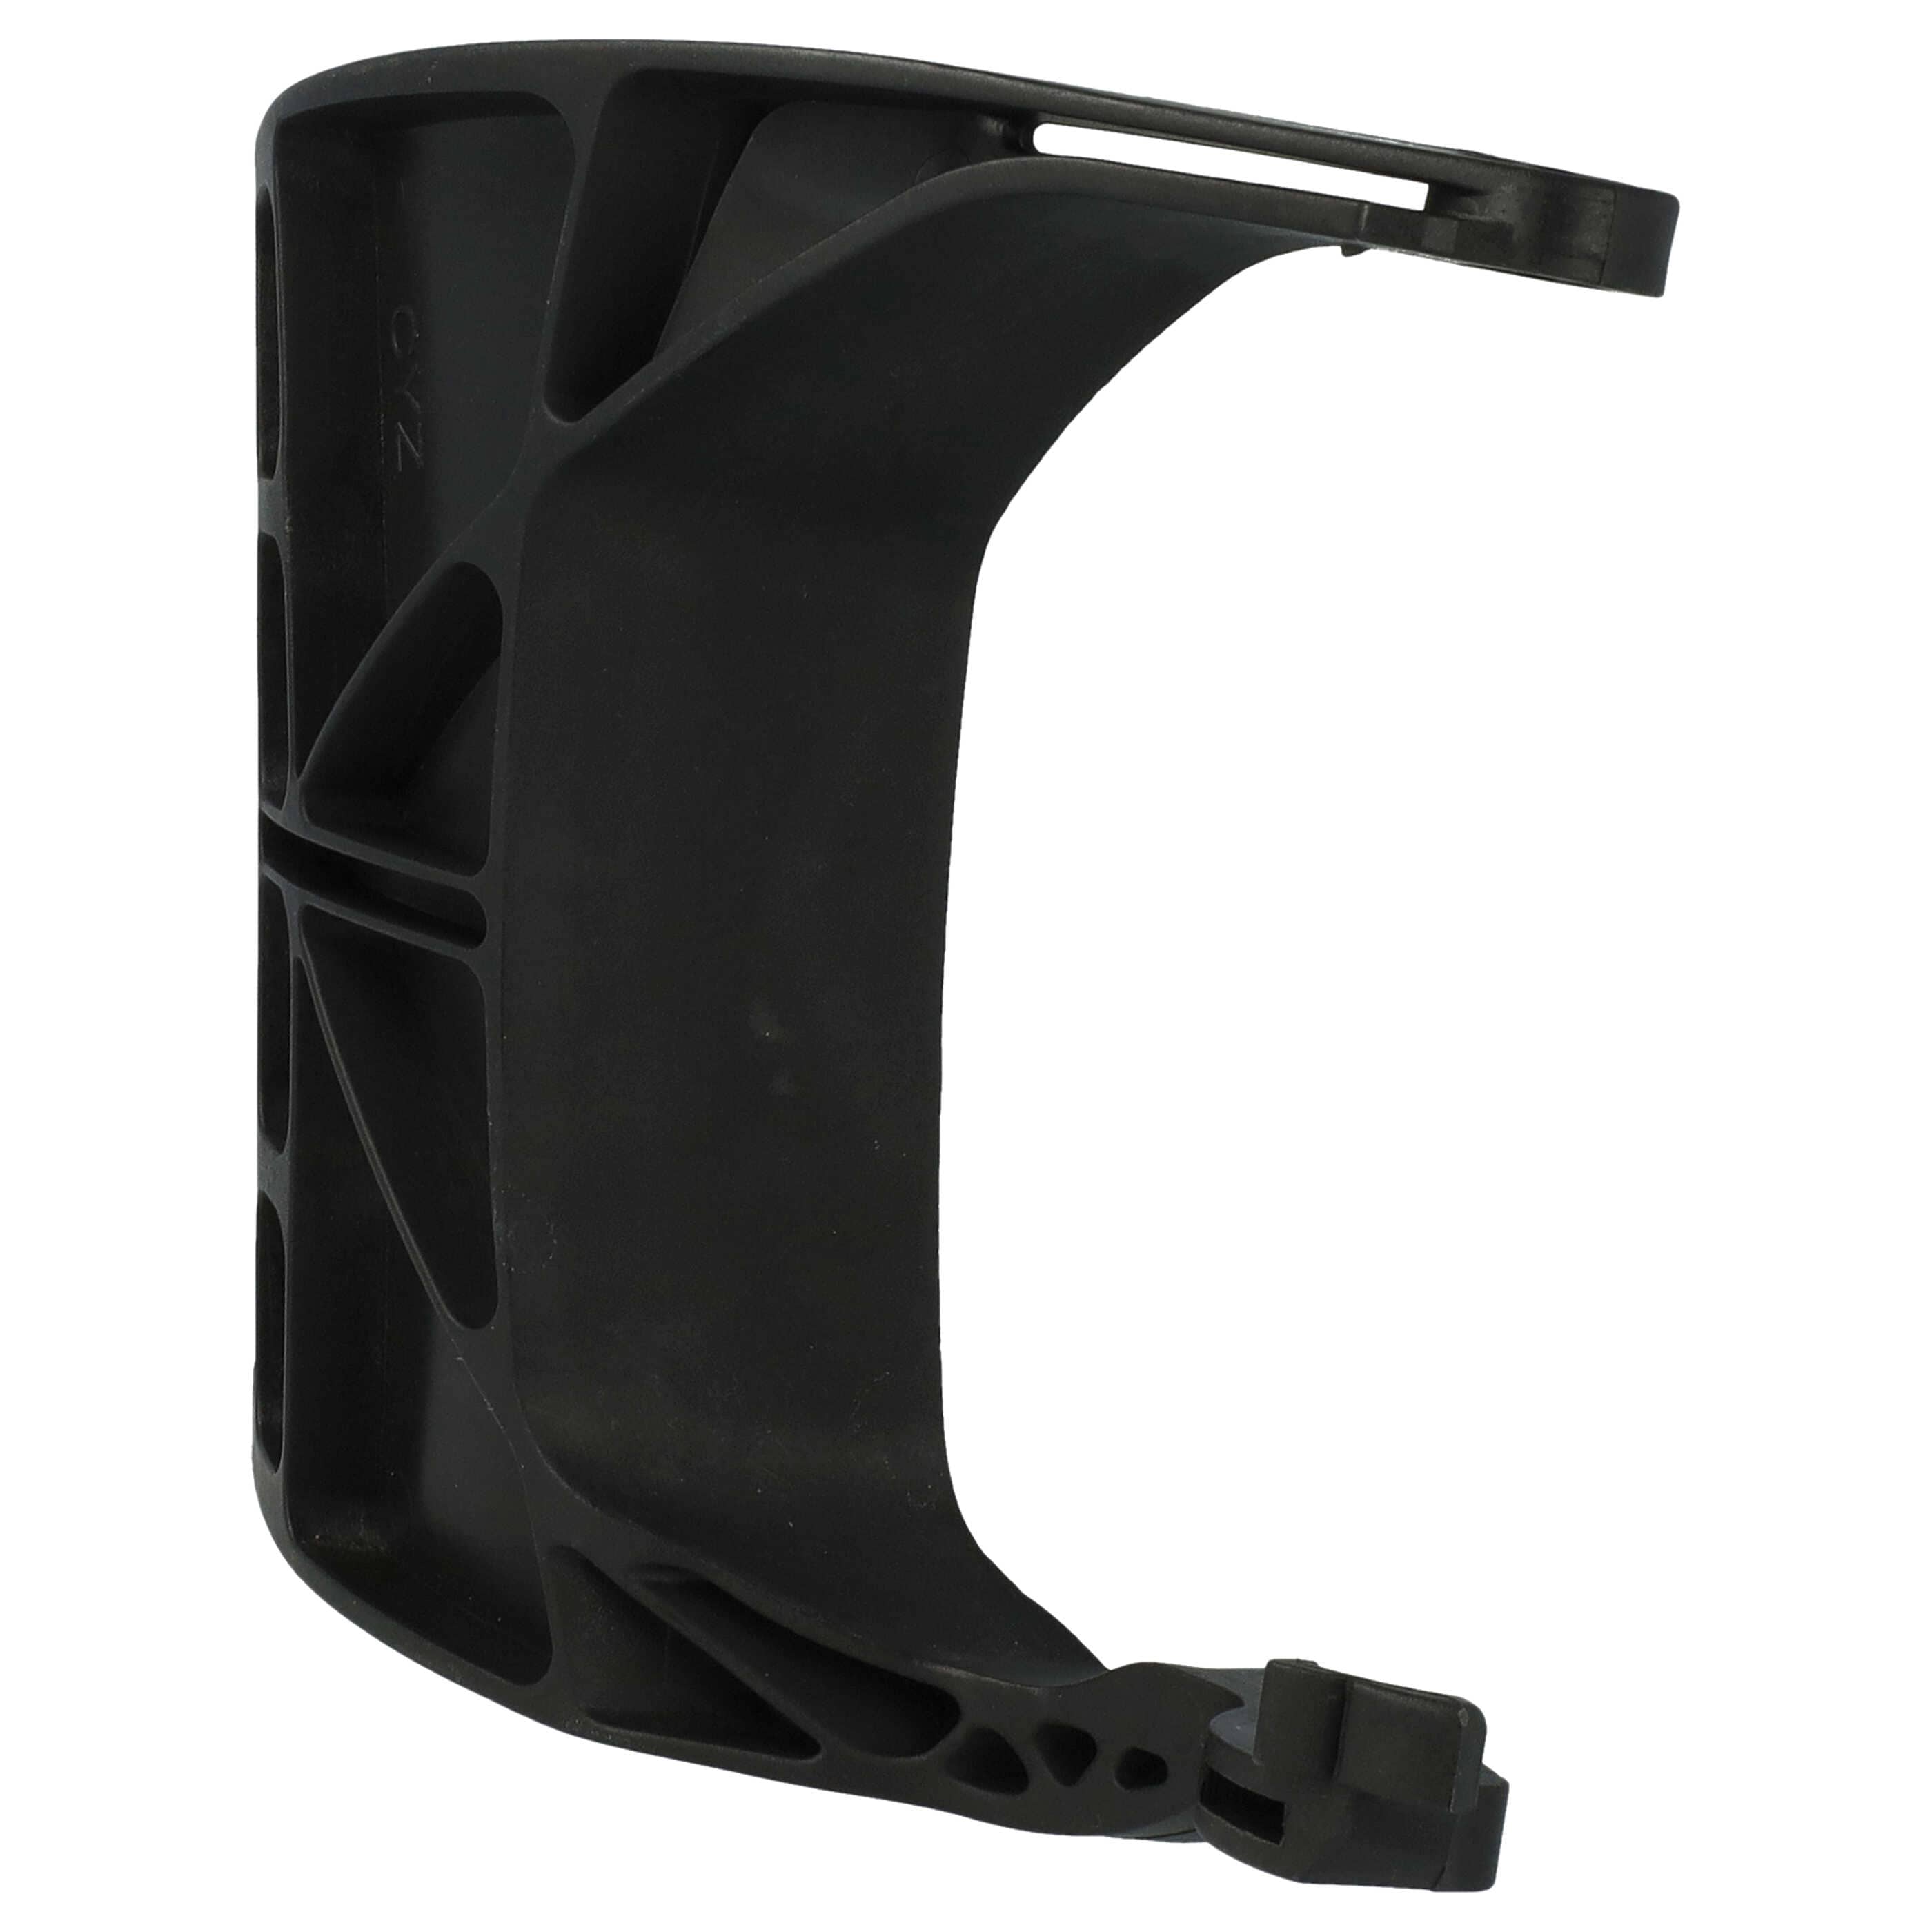 Hand Guard as Replacement for Stihl 1143 792 9103 suitable for Stihl Power Saw - 18.5 x 15.5 x 4 cm, Black